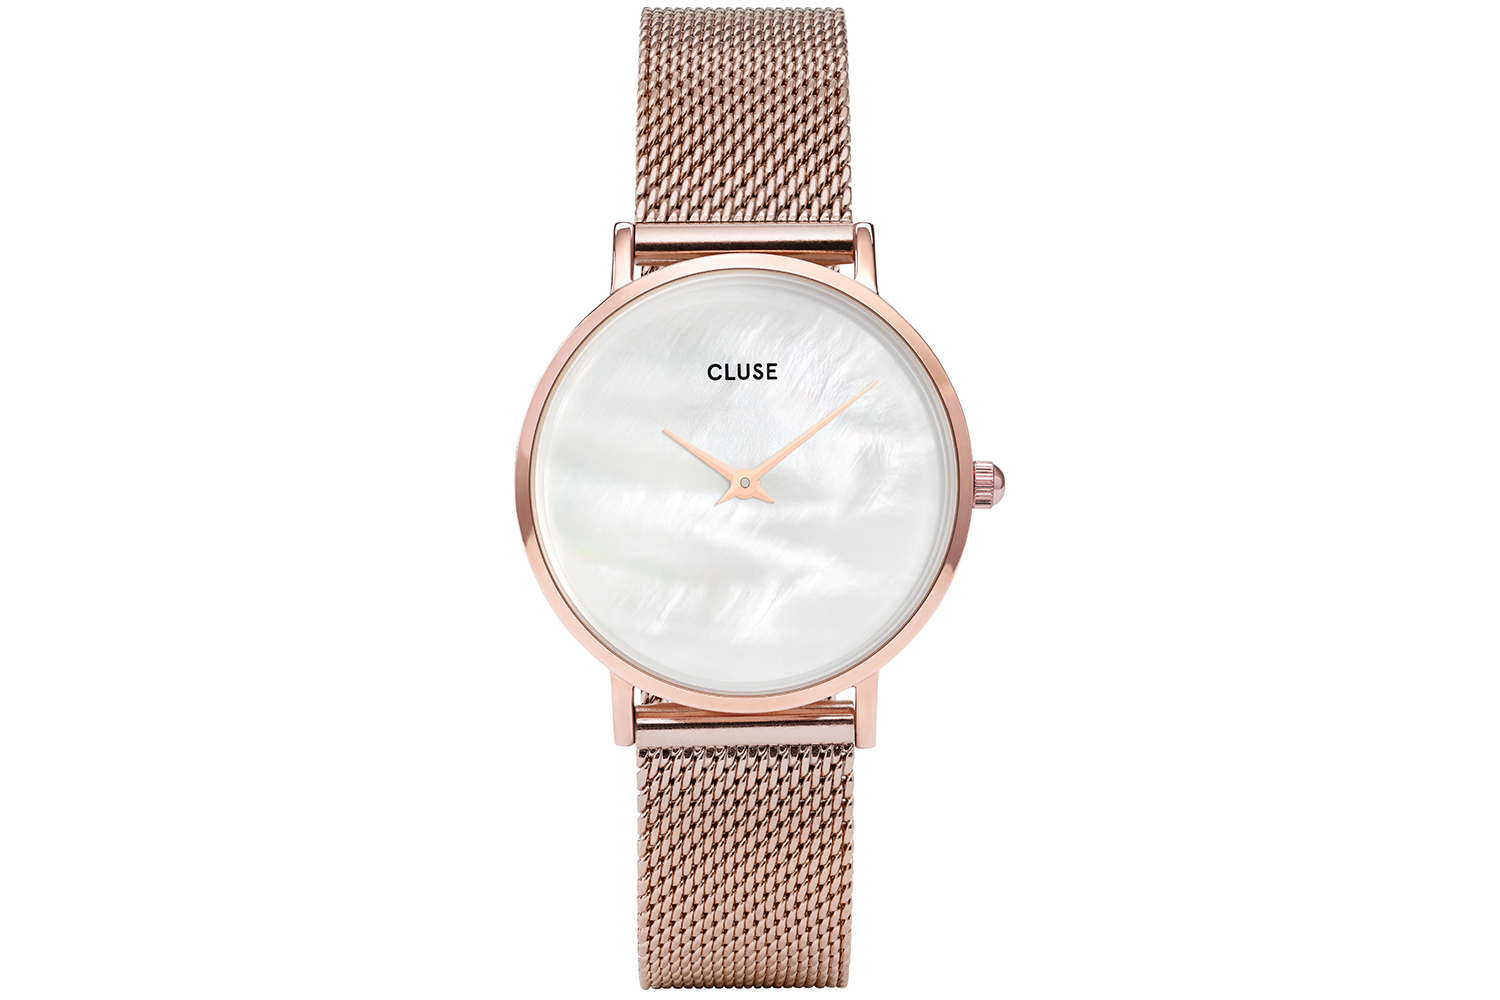 Cluse watch